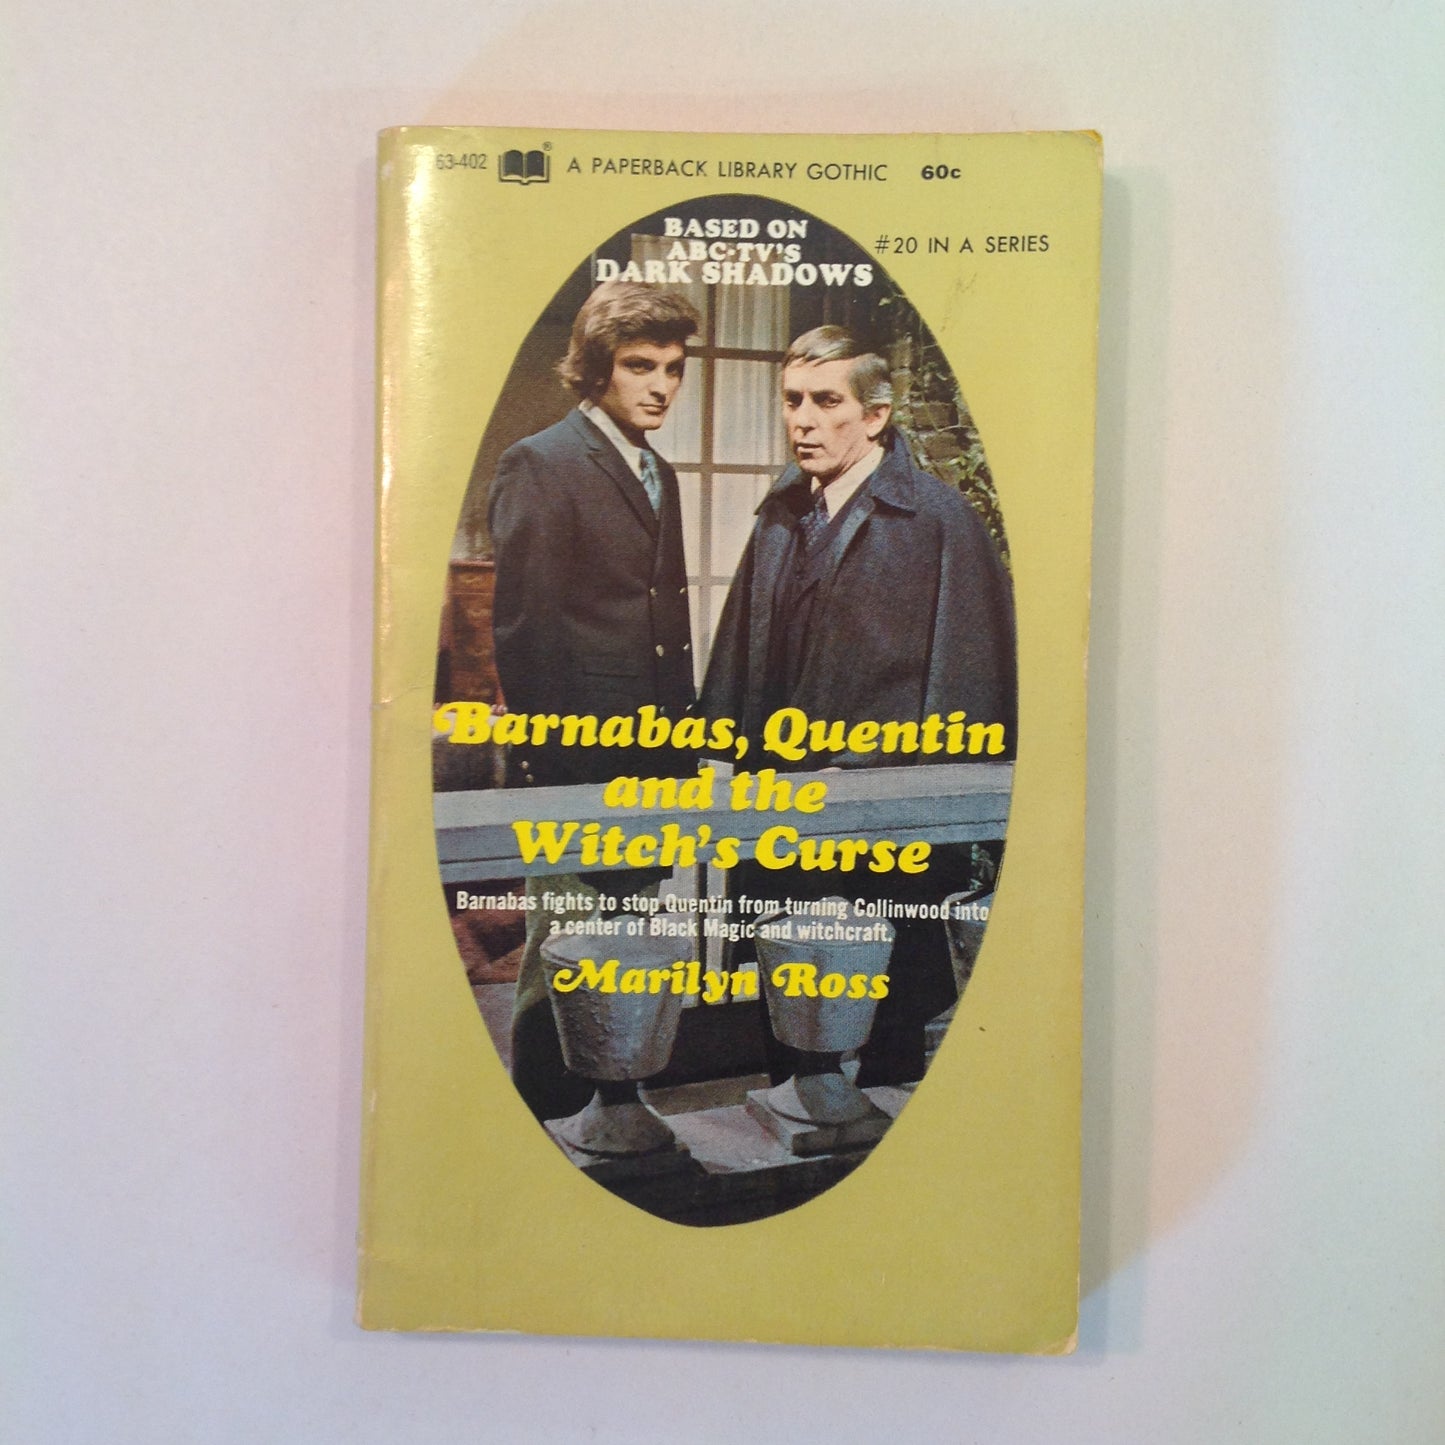 Vintage 1970 MM Paperback Dark Shadows Barnabas, Quentin and the Witch's Curse Marilyn Ross